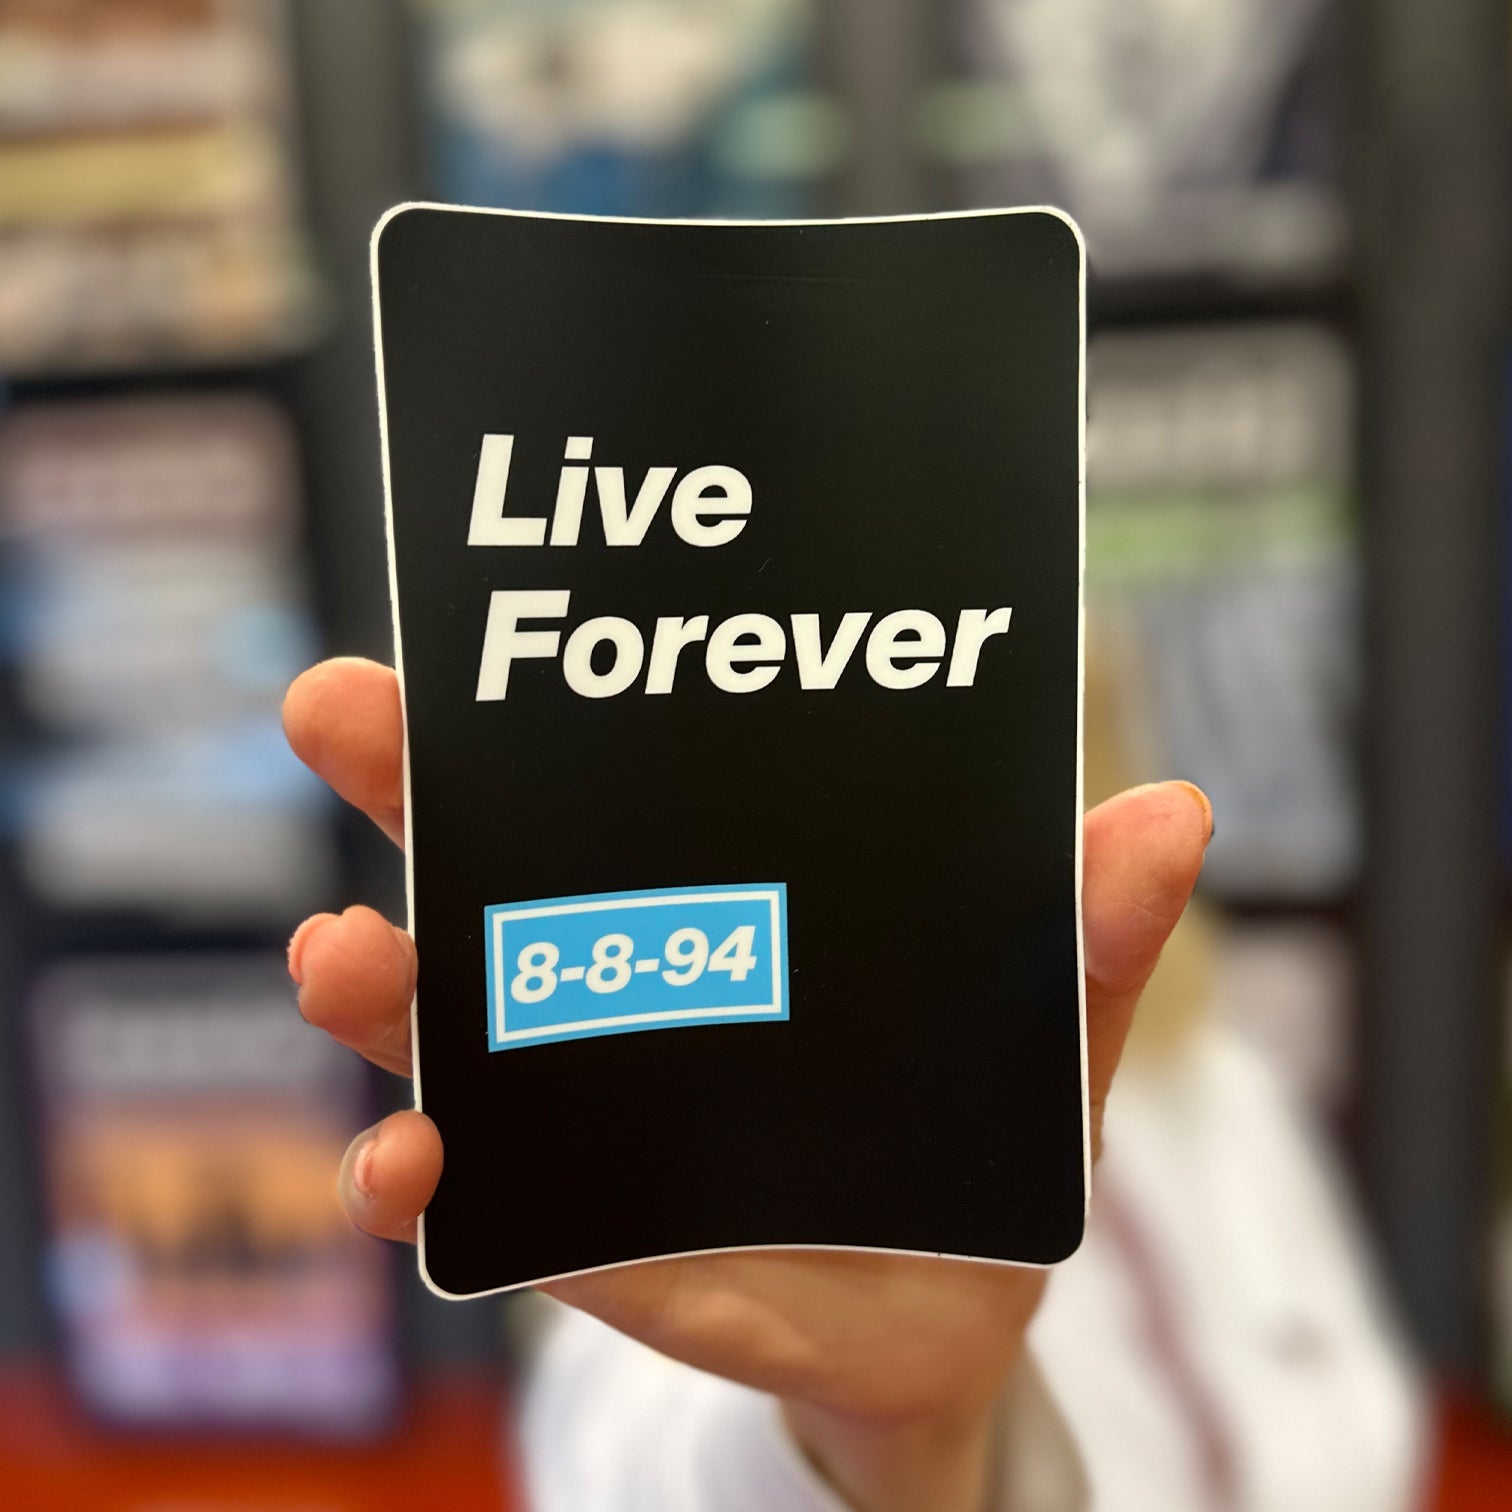 Oasis - Live Forever Sticker - New Item